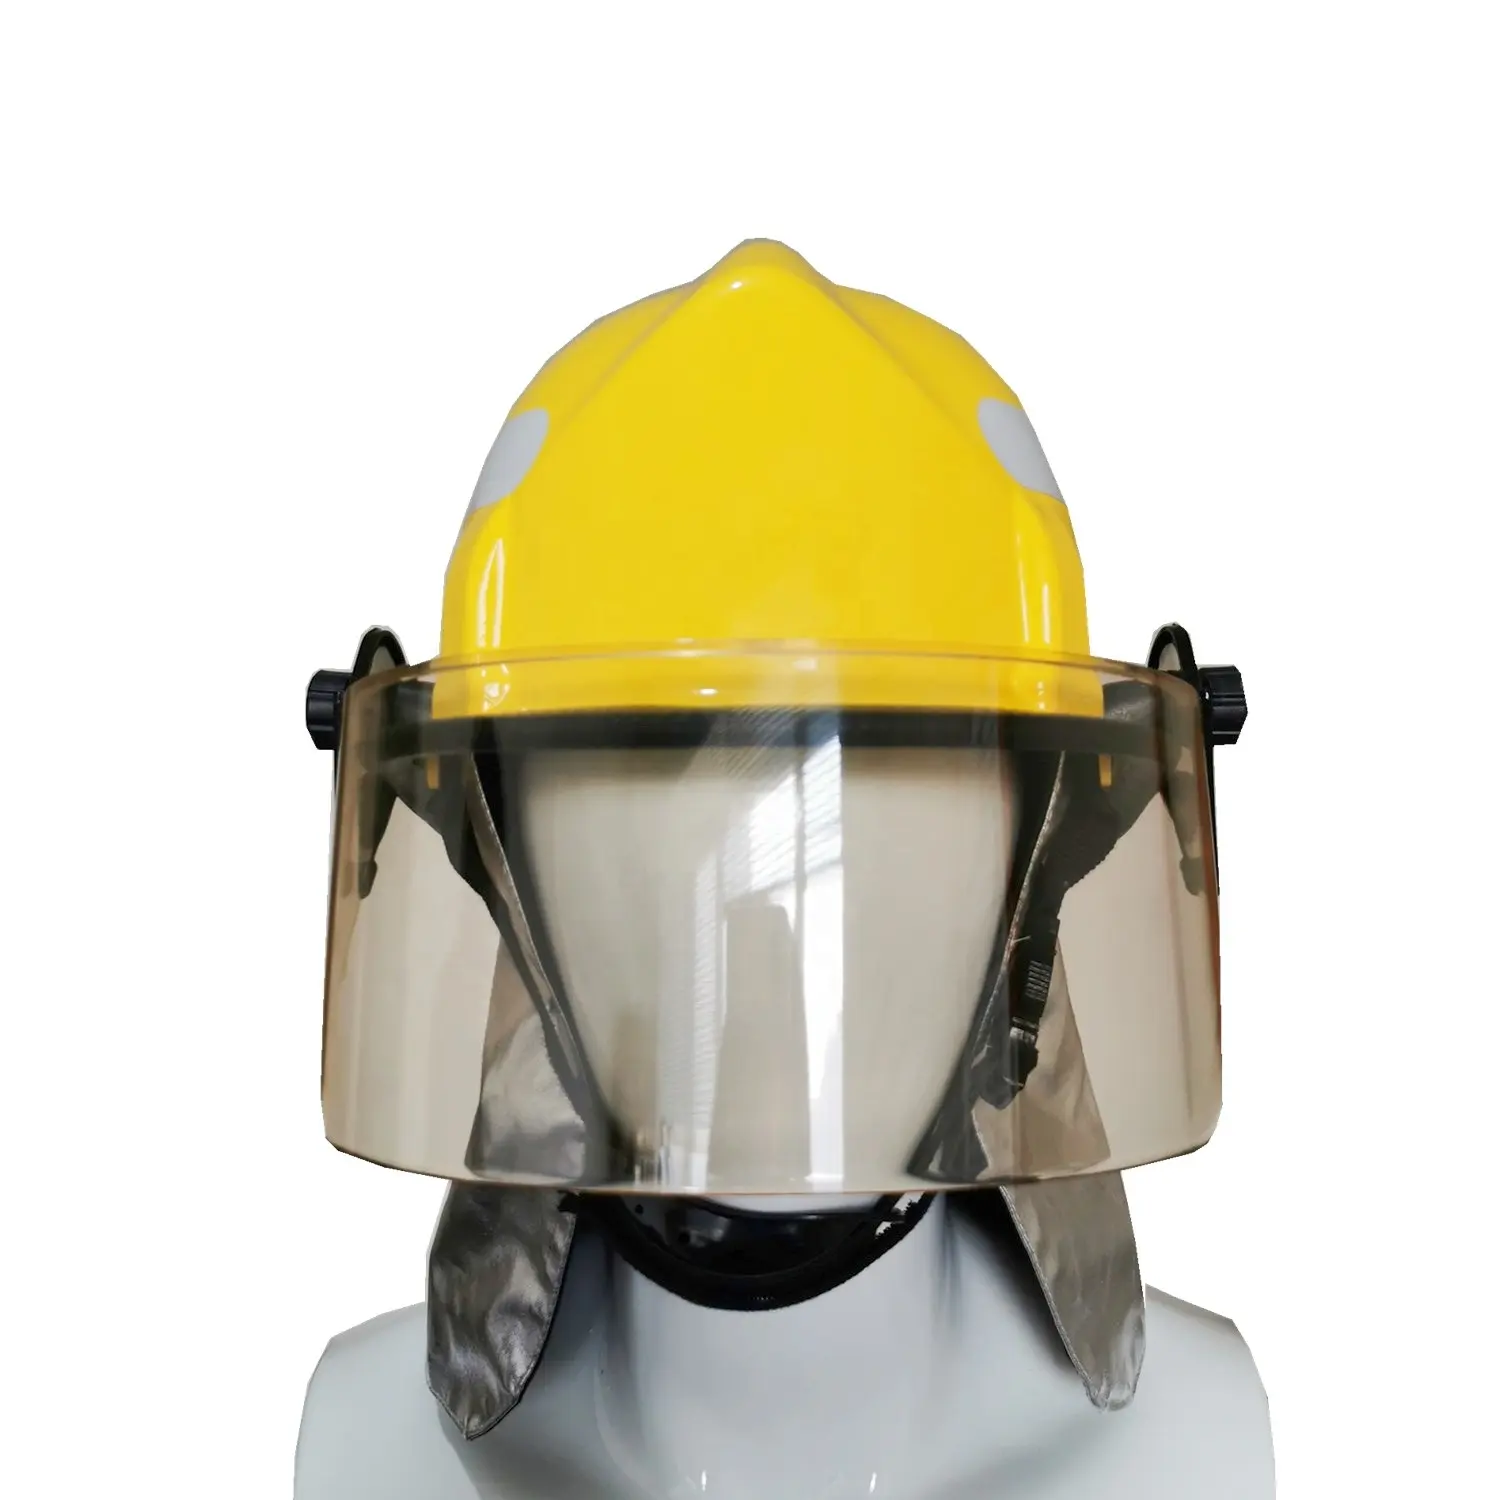 Bullard firefighting helmet CE approved with soft neck guard